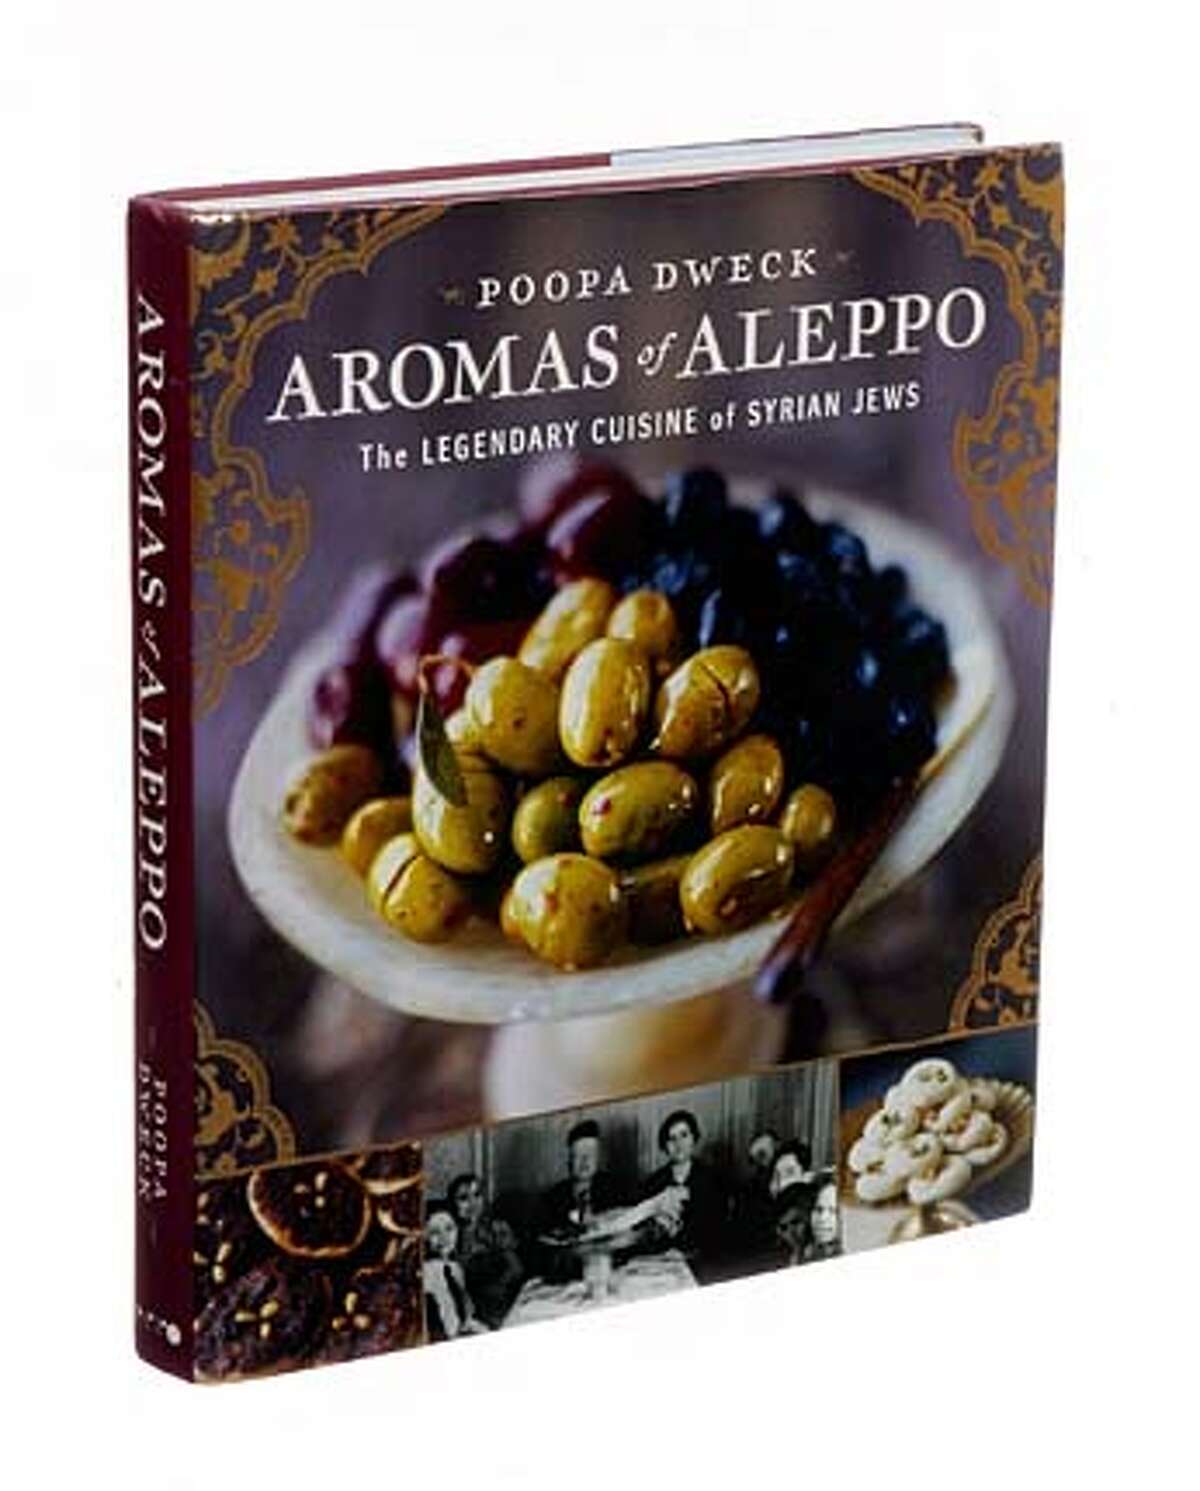 (NYT17) UNDATED -- Sept. 4, 2007 -- AROMAS-BOOK-REVIEW -- "Aromas of Aleppo: The Legendary Cuisine of Syrian Jews" by Poopa Dweck. (Lars Klove/The New York Times)